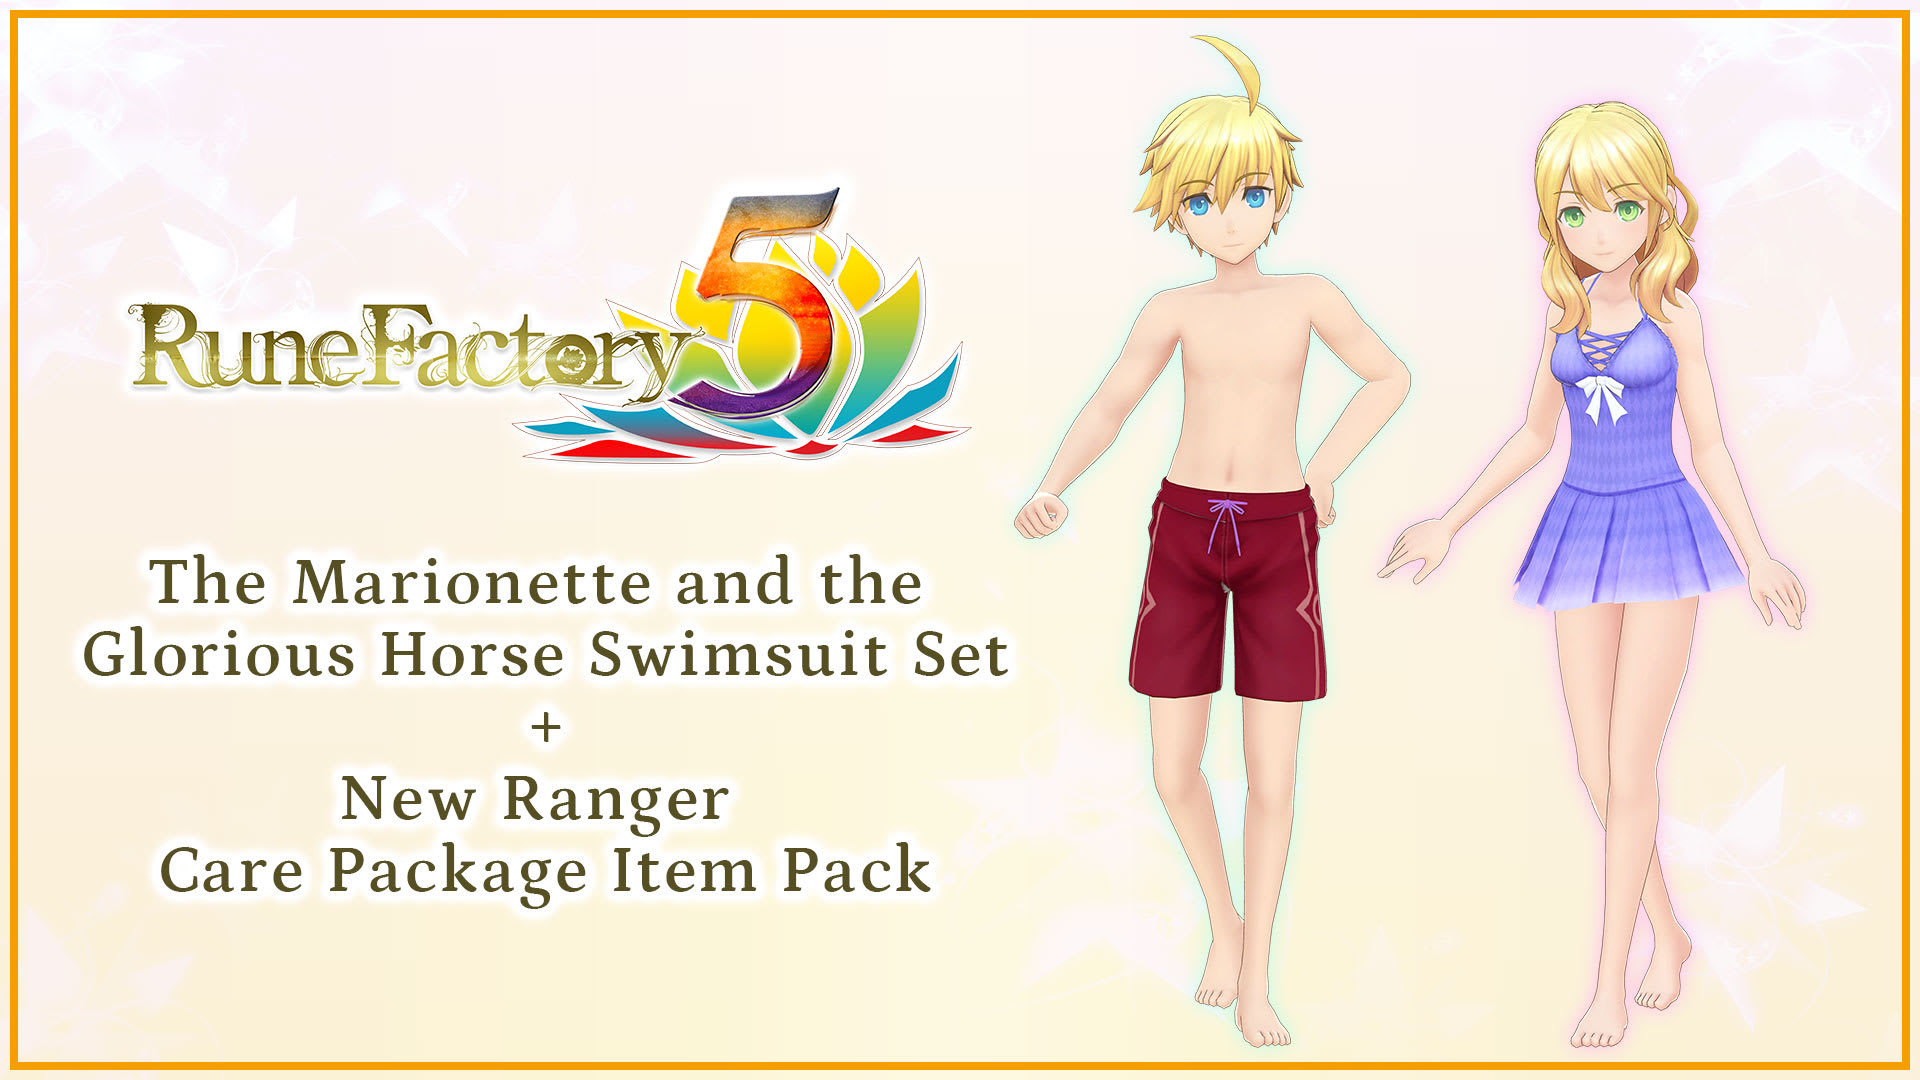 The Marionette and the Glorious Horse Swimsuit Set + New Ranger Care Package Item Pack